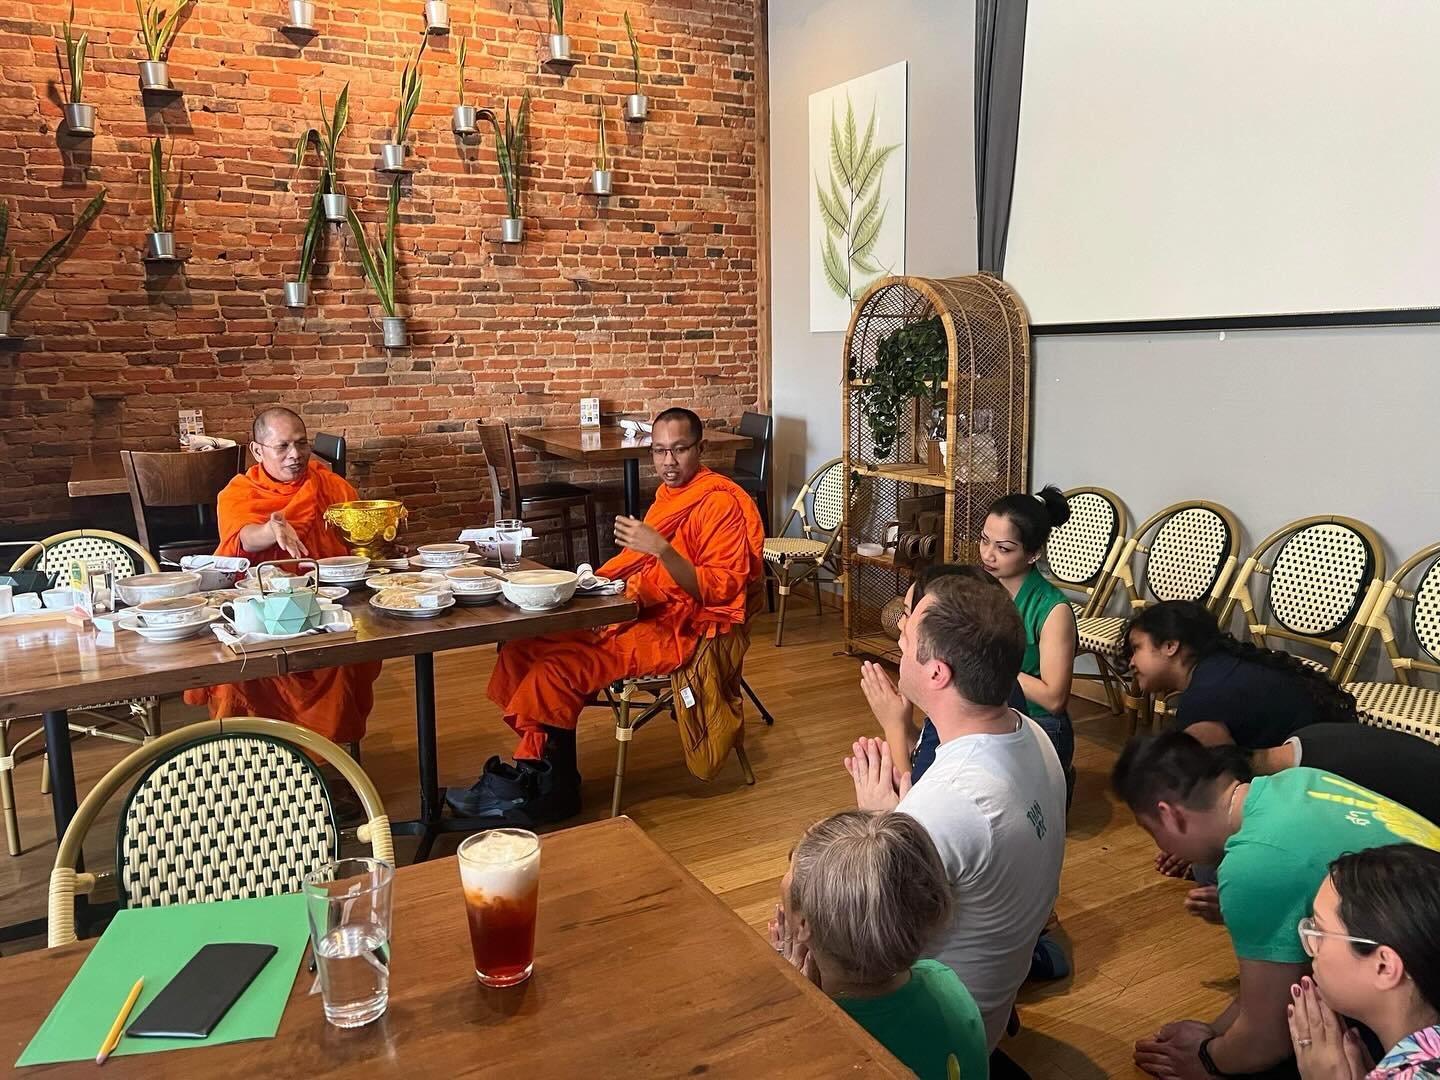 We are so thrilled to share with you our morning celebration at ThaiPop. The presence of Buddhist Monks from the Cambodian temple here in Rochester was a true blessing, filling our hearts with gratitude and good energy. We are honored to have their p